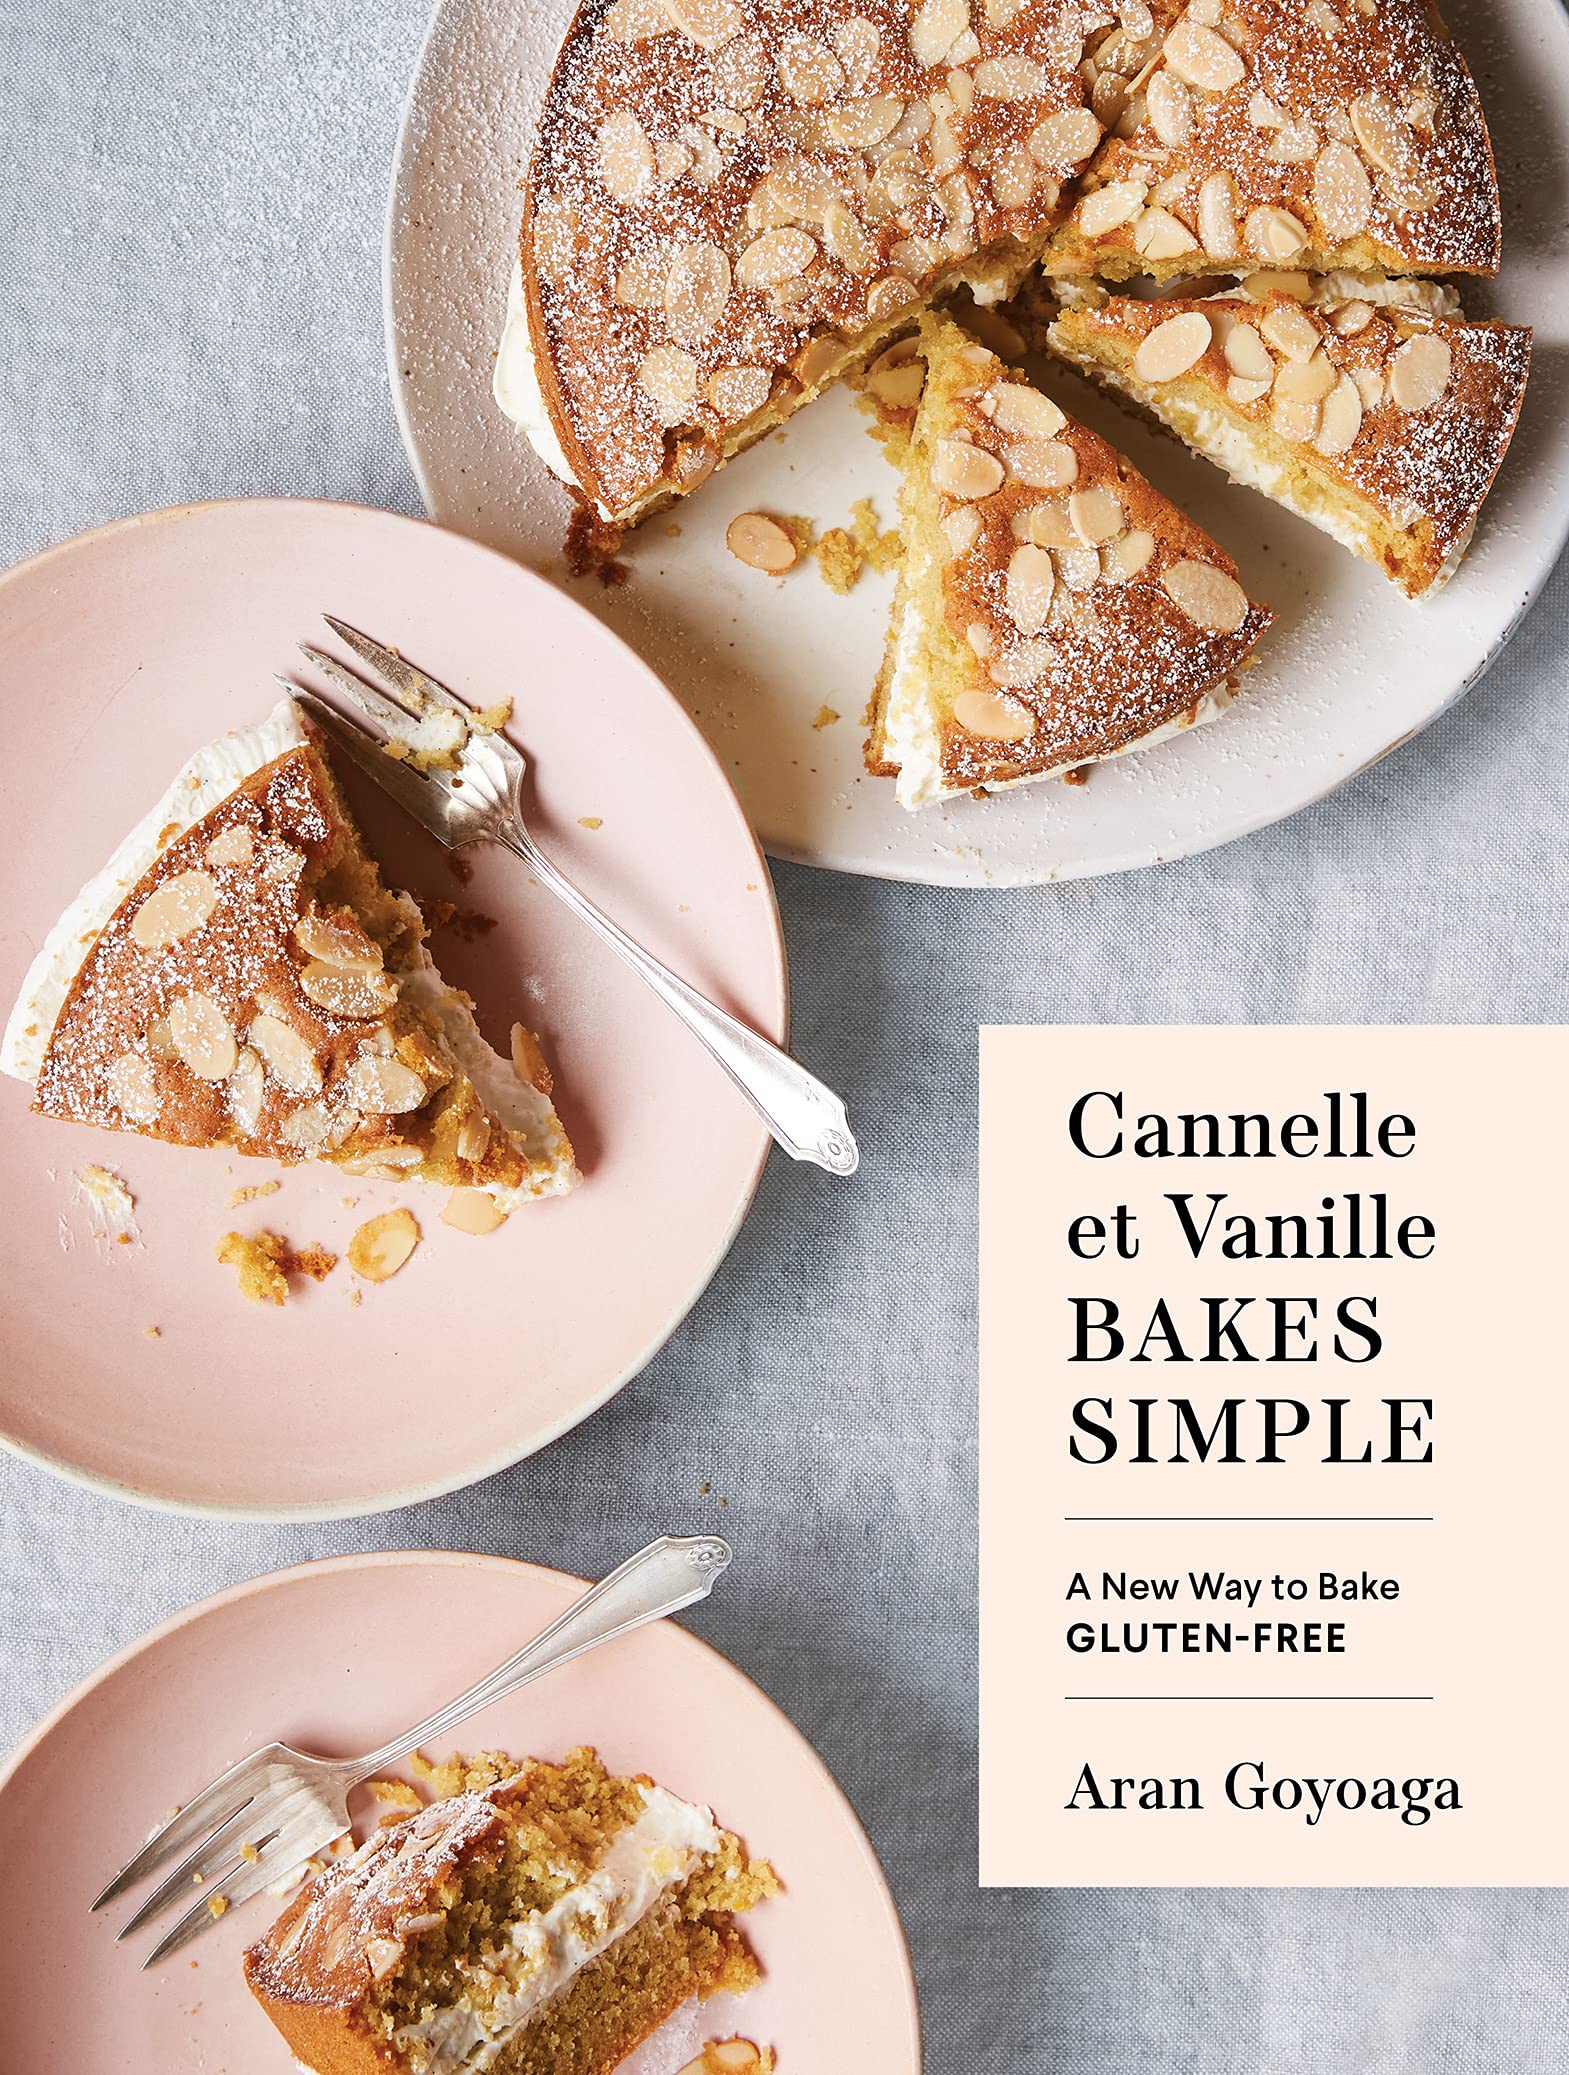 Cannelle et Vanille Bakes Simple: A New Way to Bake Gluten-Free (Aran Goyoaga)